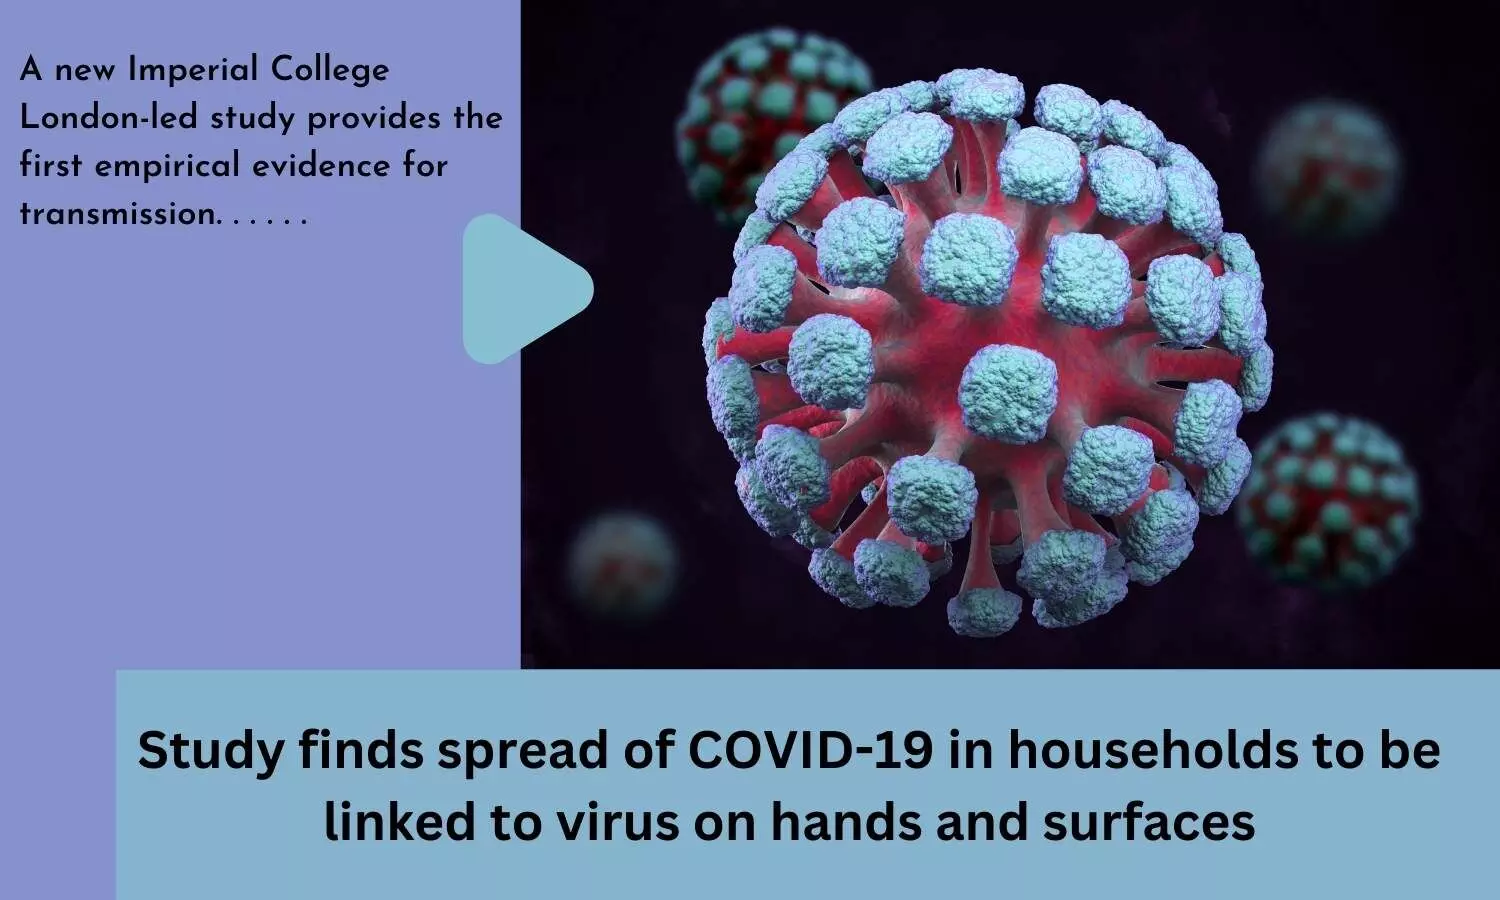 Study finds spread of COVID-19 in households to be linked to virus on hands and surfaces